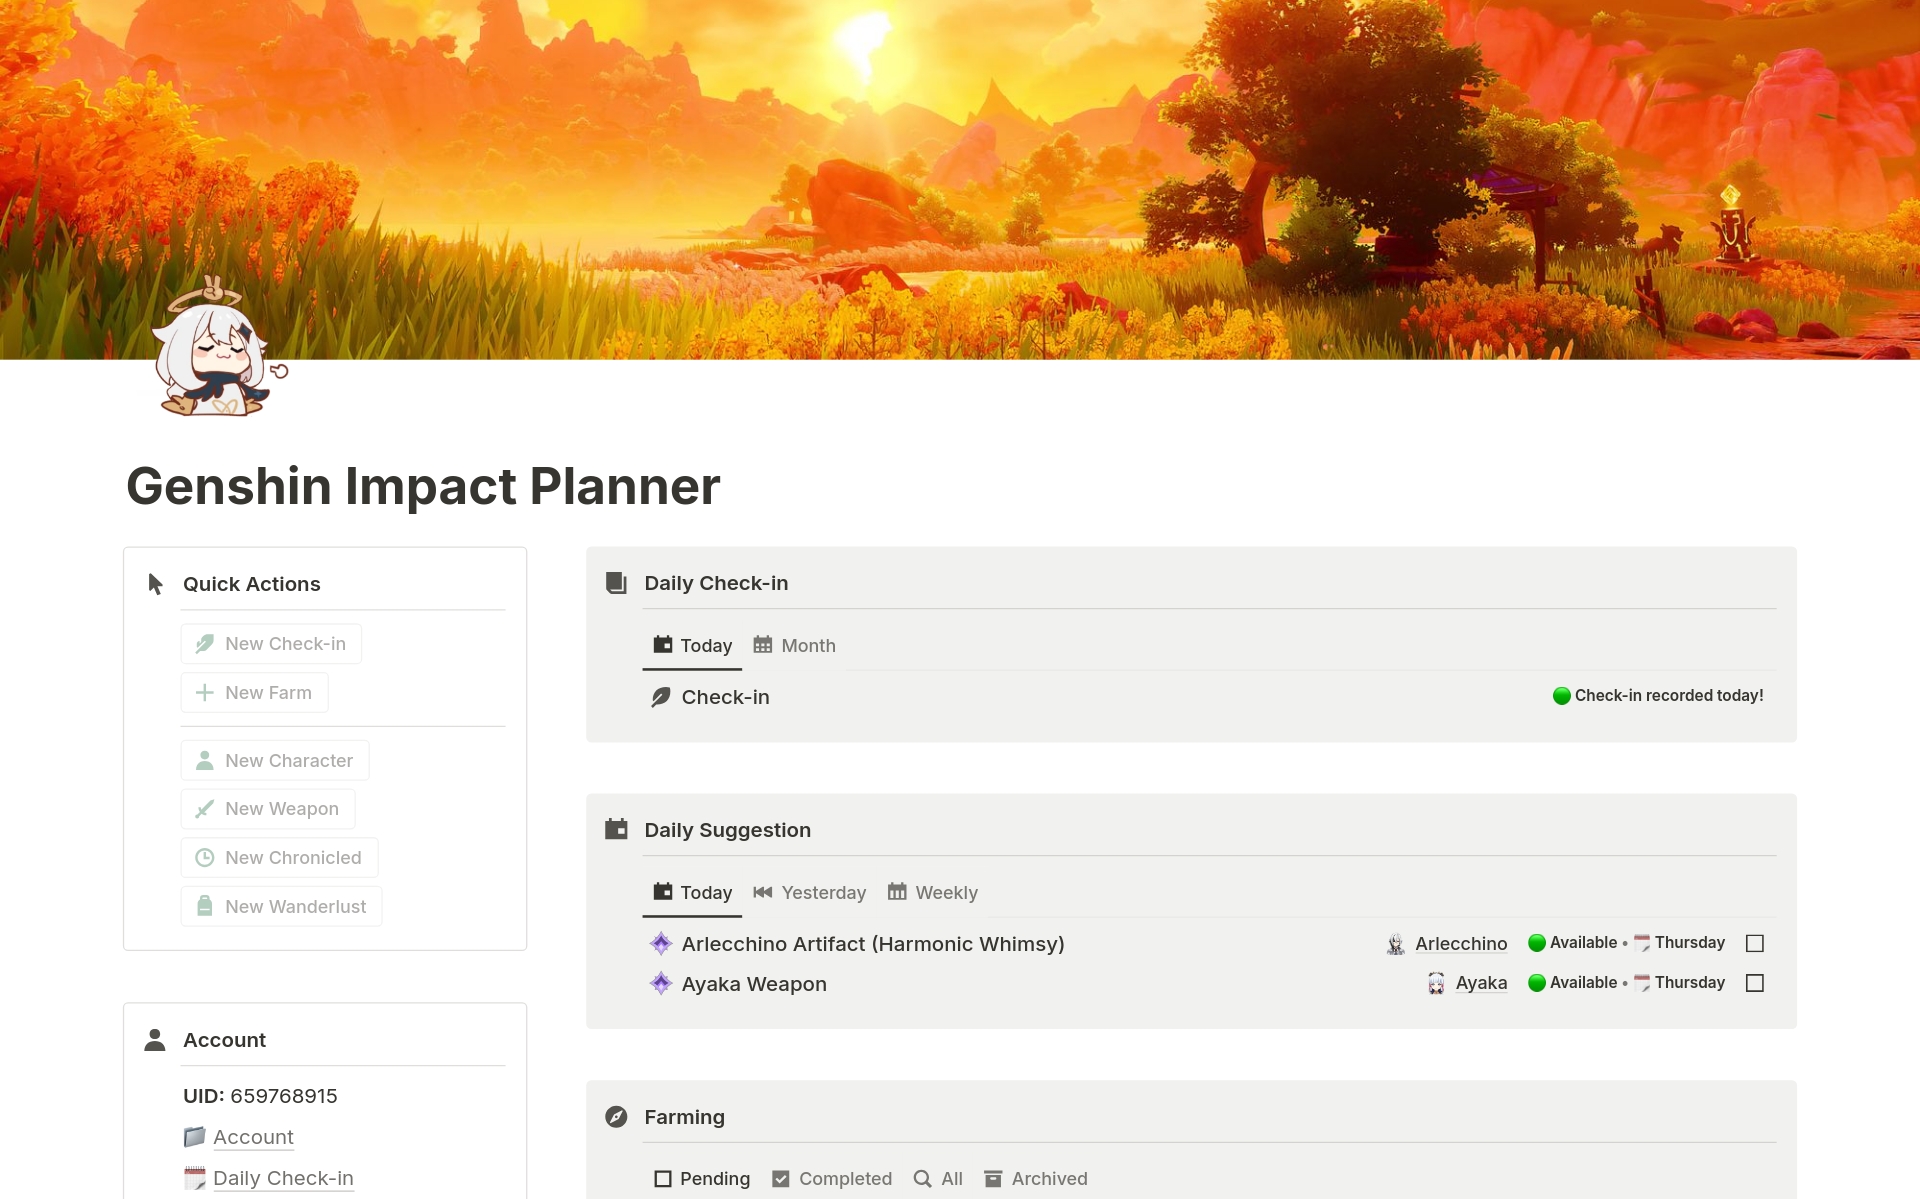 This template lets you create a weekly farming plan and receive daily task suggestions. Easily add your wishes and get an automatically updated summary for every game banner. Plus, it includes a database with all playable characters in the game, and much more. Check it out now! ⭐